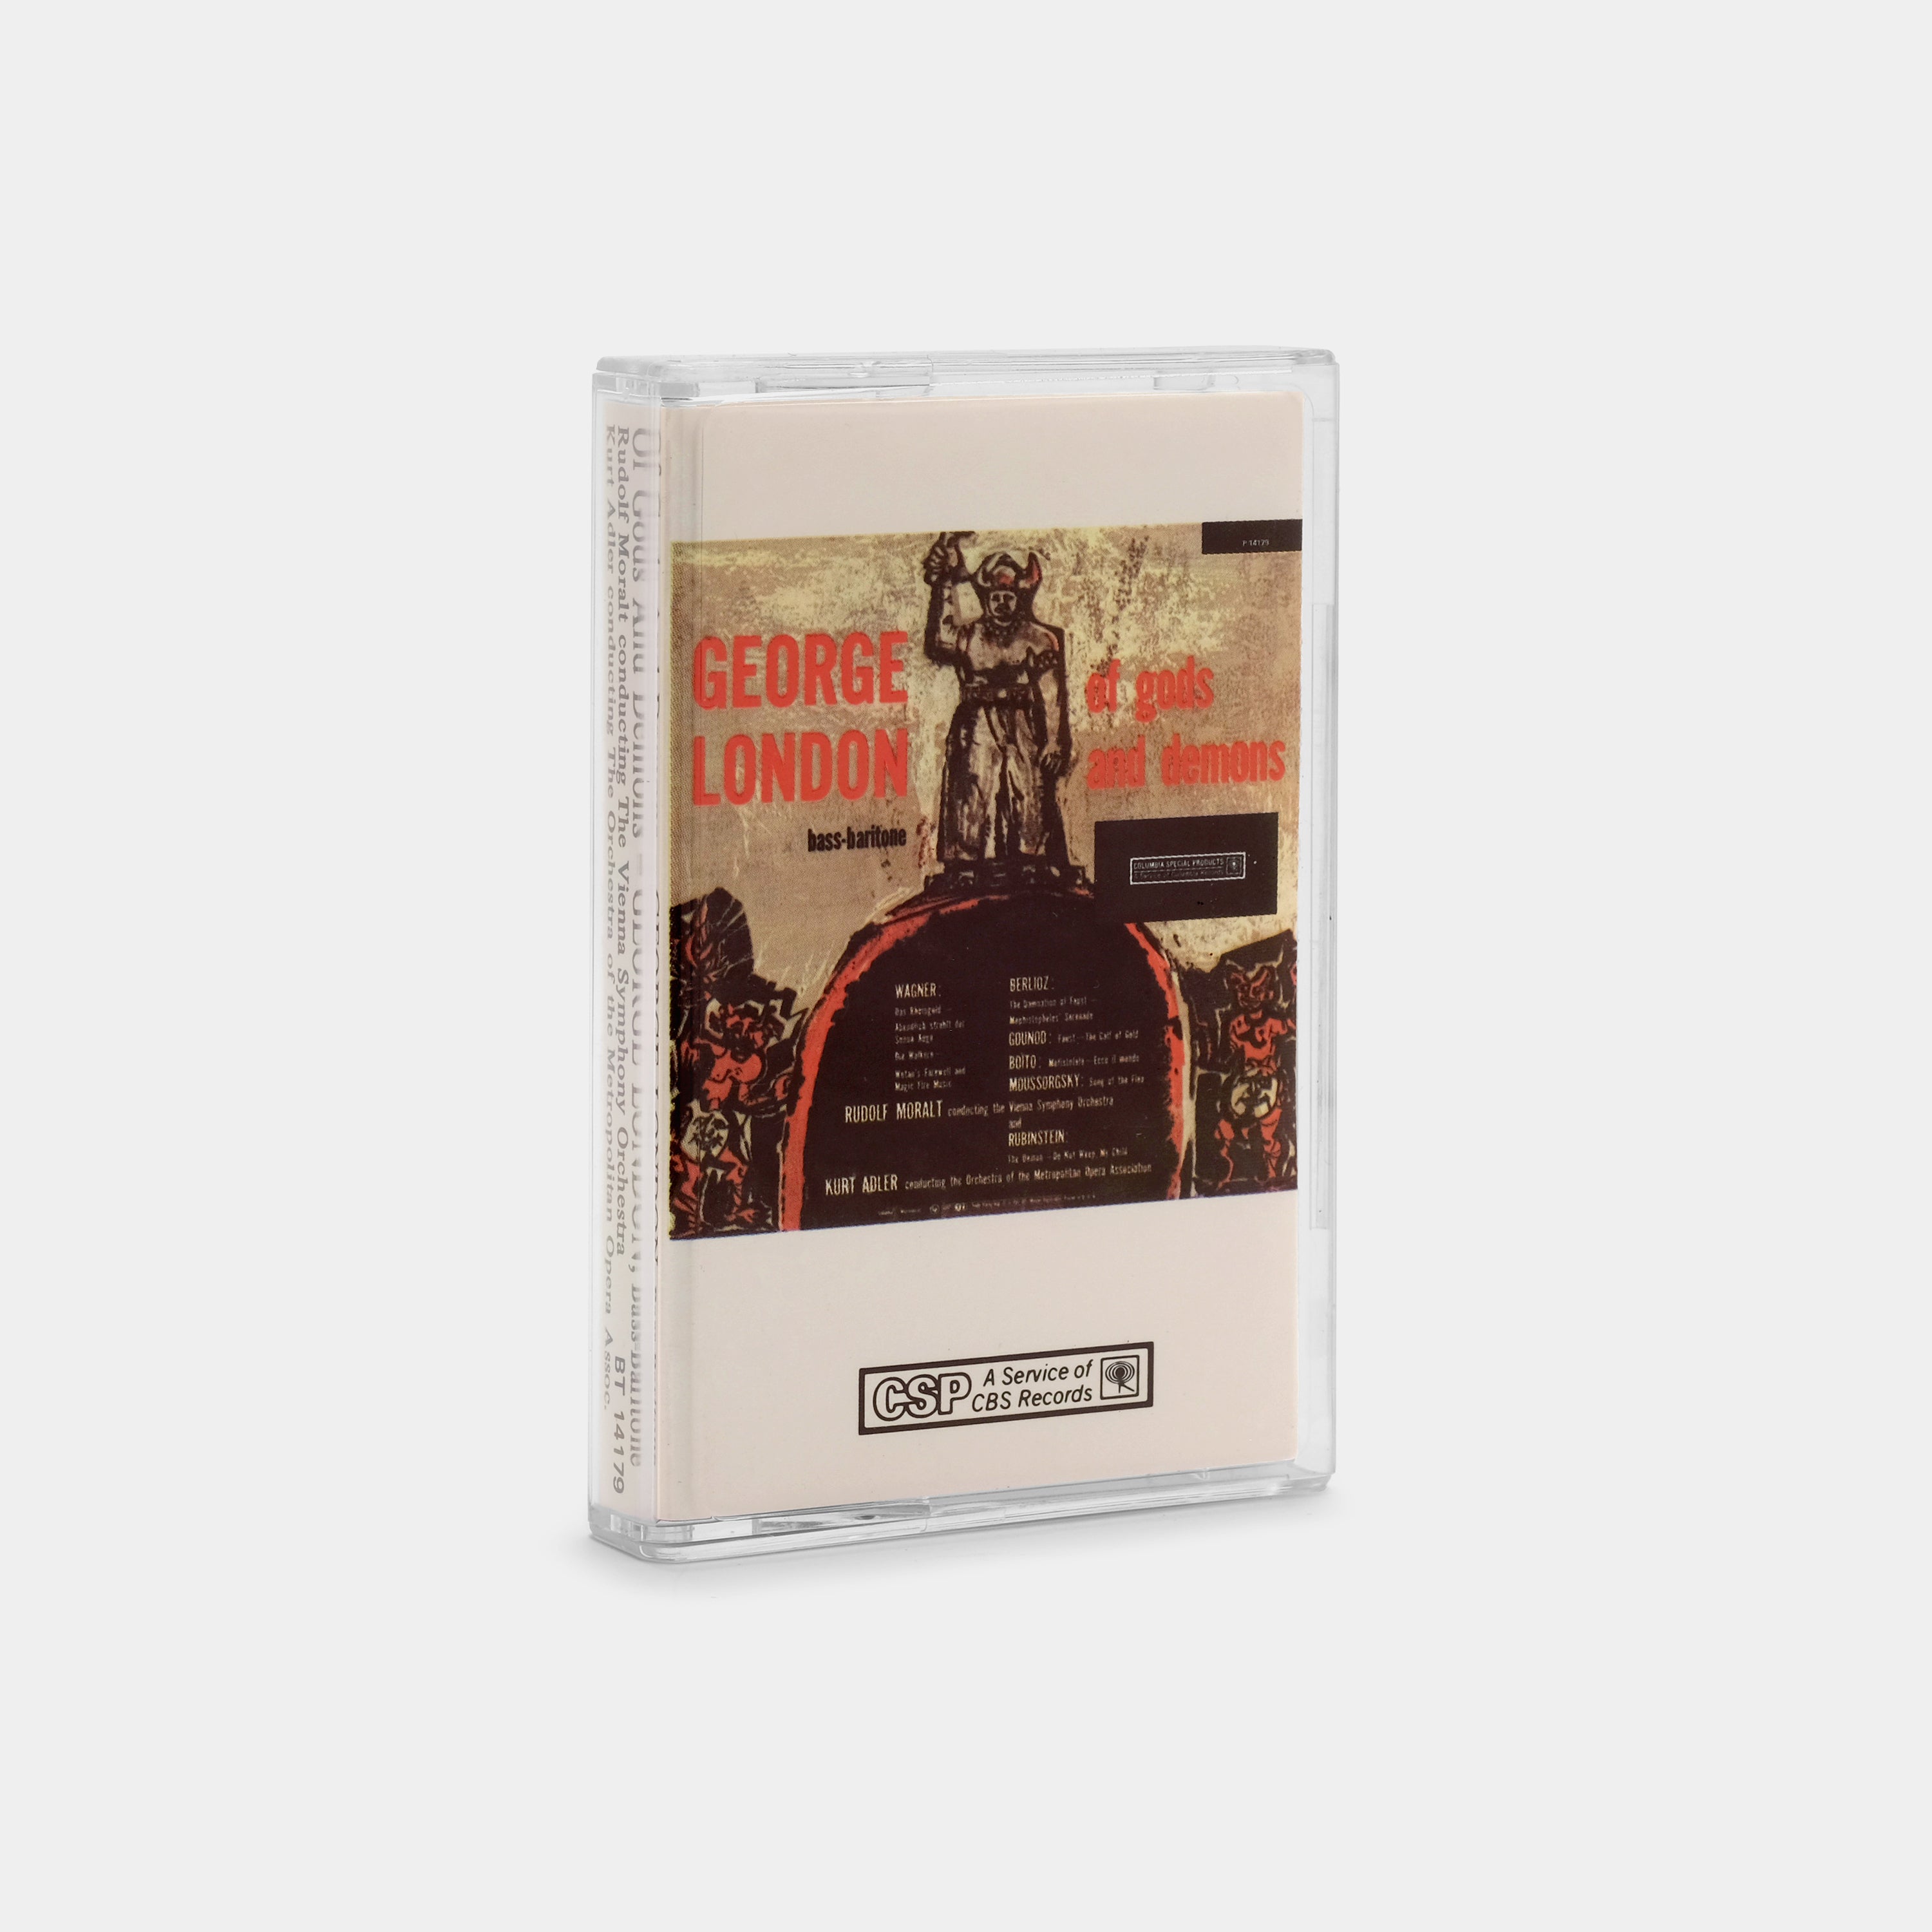 George London - Of Gods And Demons Cassette Tape